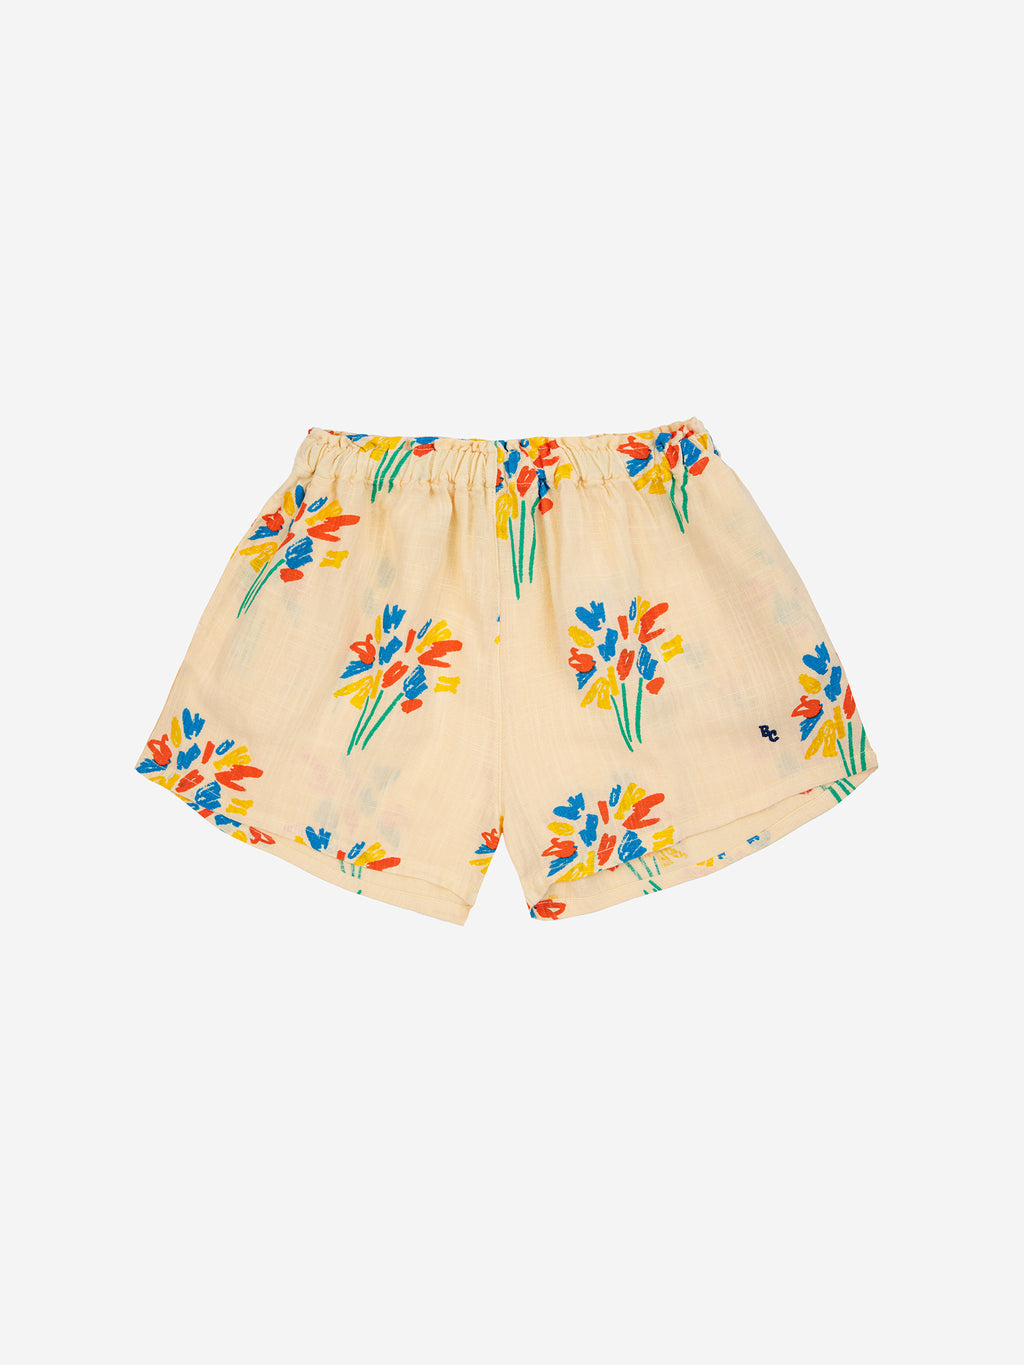 Bobo Choses Fireworks All Over Woven Shorts - Light Yellow